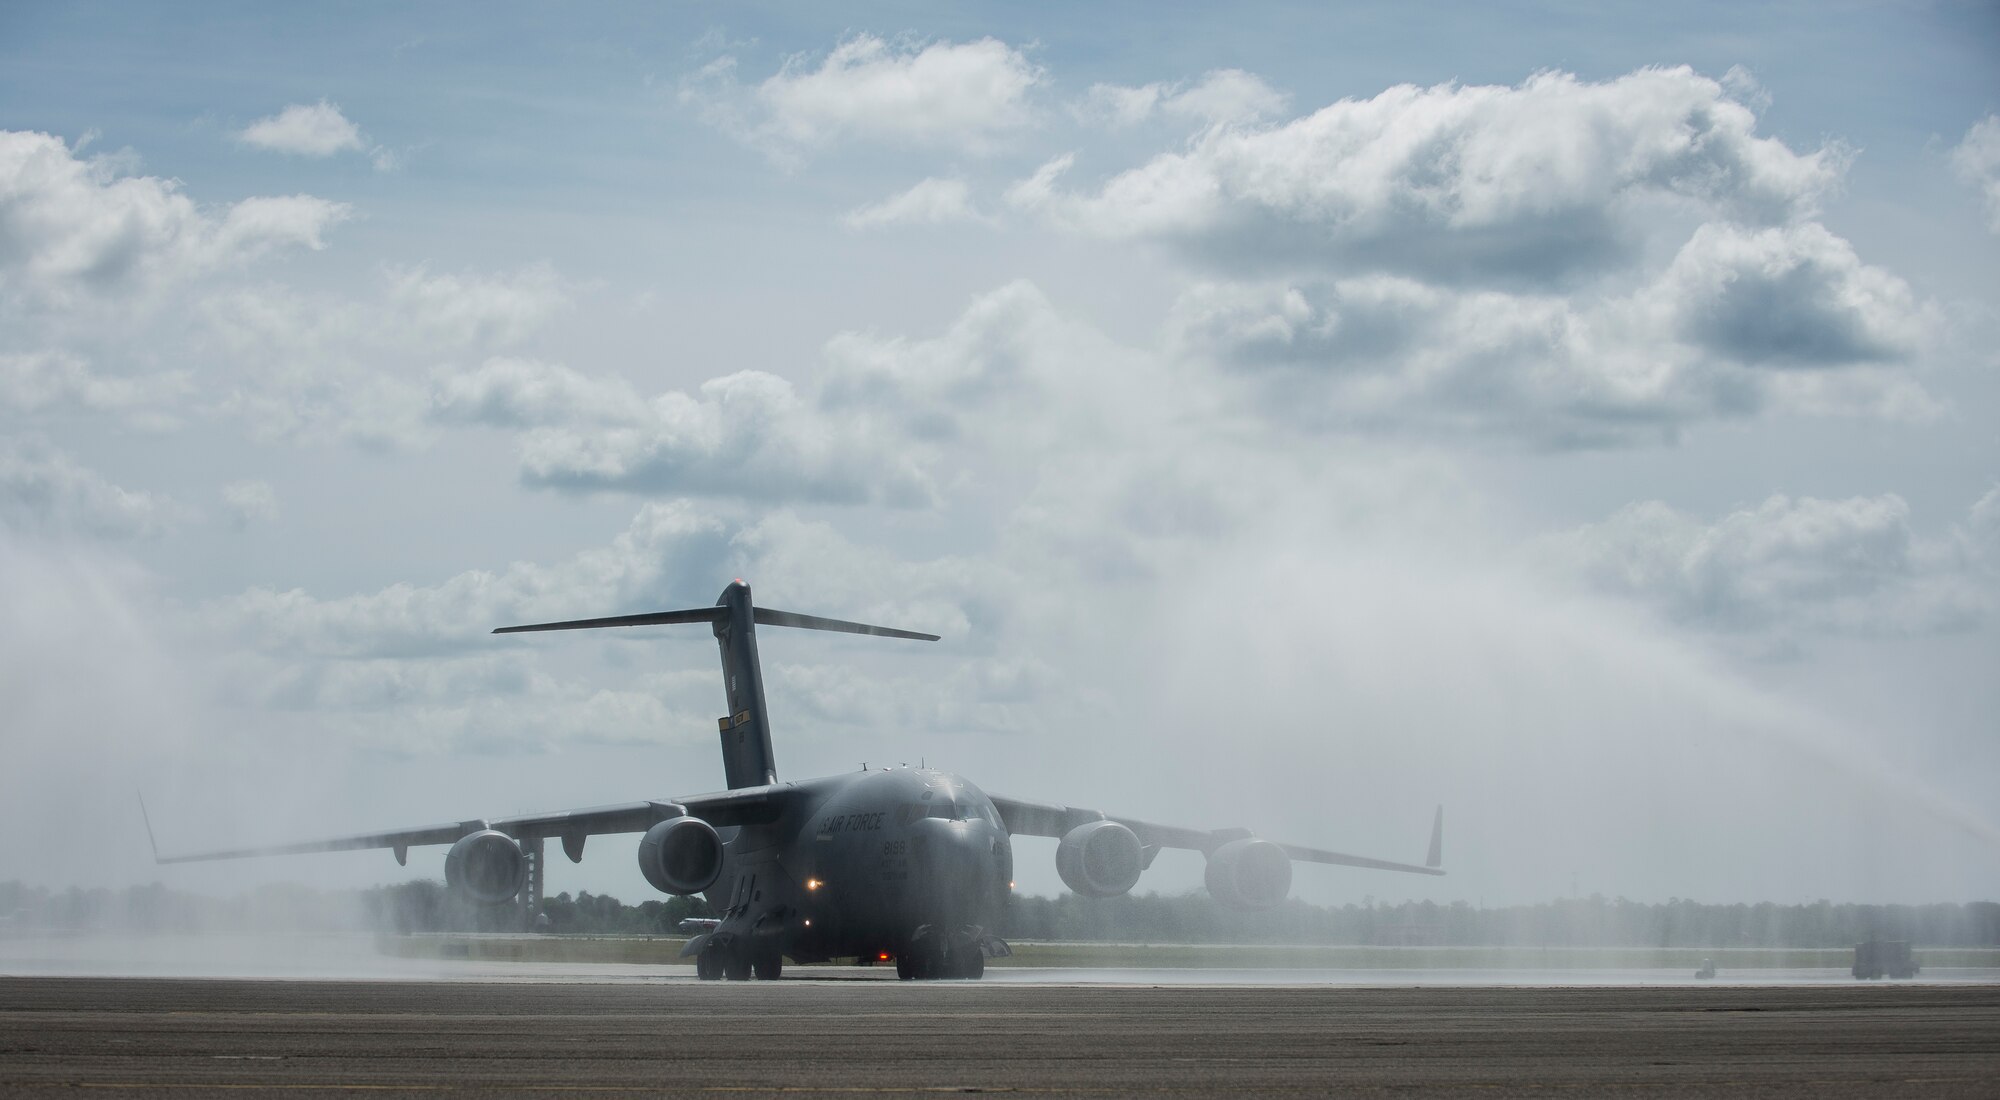 A C-17 Globemaster III assigned to the 437th Airlift Wing and the 315th Airlift Wing is sprayed with water May 5, 2015 at Joint Base Charleston, S.C., during an event celebrating the C-17 surpassing the three millionth flying hour.  Aircrew members from JB Charleston flew the plane here from Robins Air Force Base, Ga. The first C-17 flight was Sept. 15, 1991 and the Air Force currently has 222 C-17’s in the fleet. (U.S. Air Force photo/Senior Airman Jared Trimarchi) 